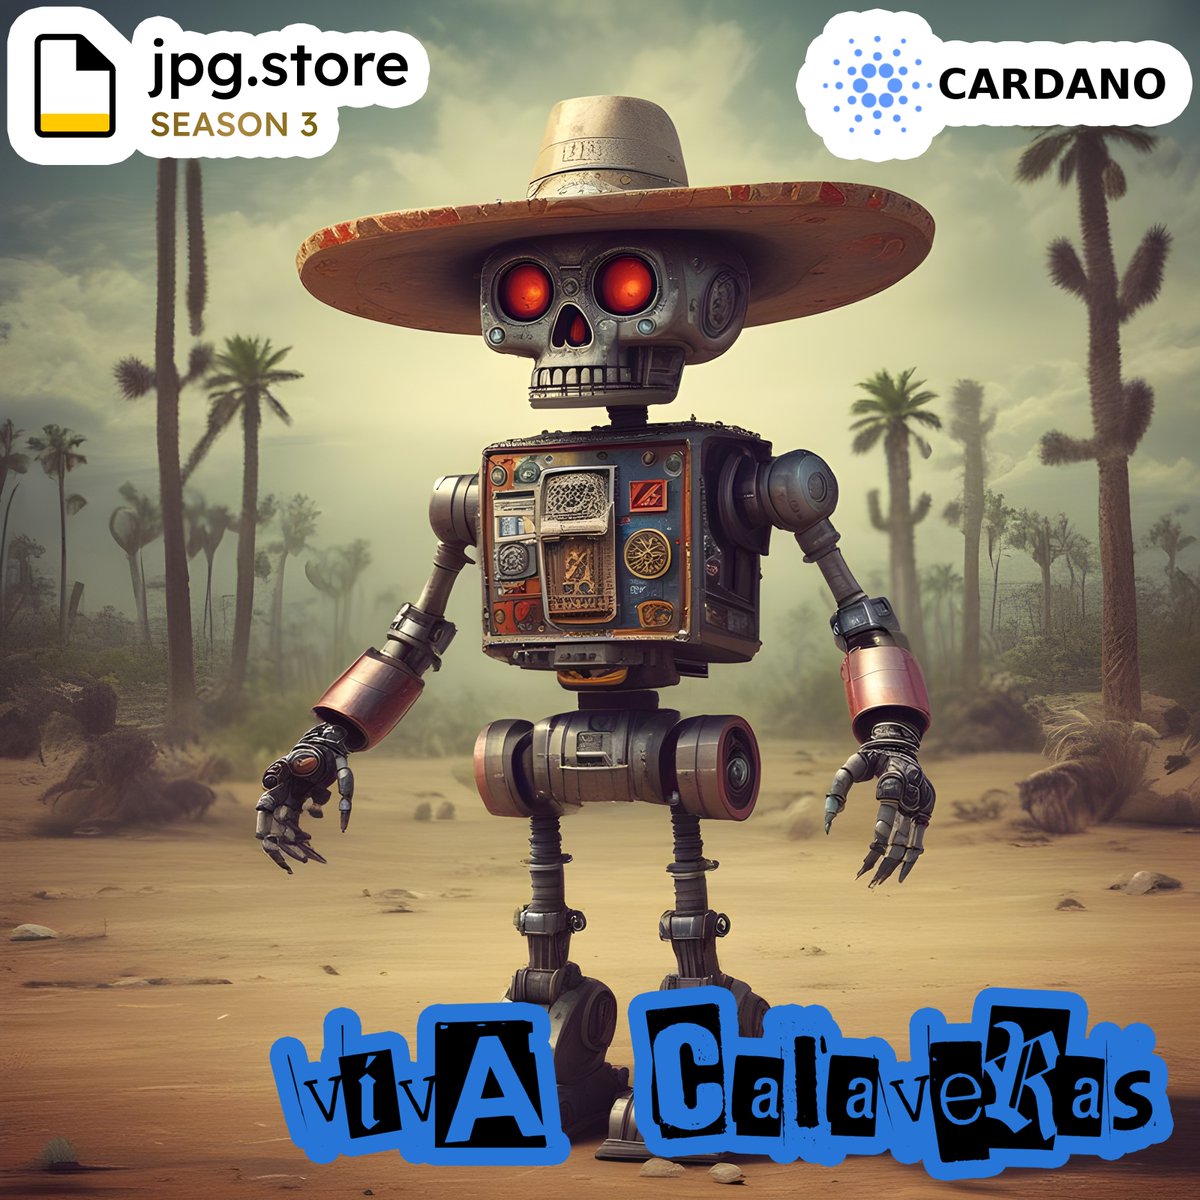 Viva Calaveras on Cardano via jpg.store ! These NFTs can be redeemed for a signed 3D printed K-SCOPES® Trading Card.

Juke
jpg.store/listing/226786…

#cardano #ADA #CardanoNFT #NFT #vivacalaveras #calaveras #kscopes #tradingcards #3dprinting #AI #AImusic